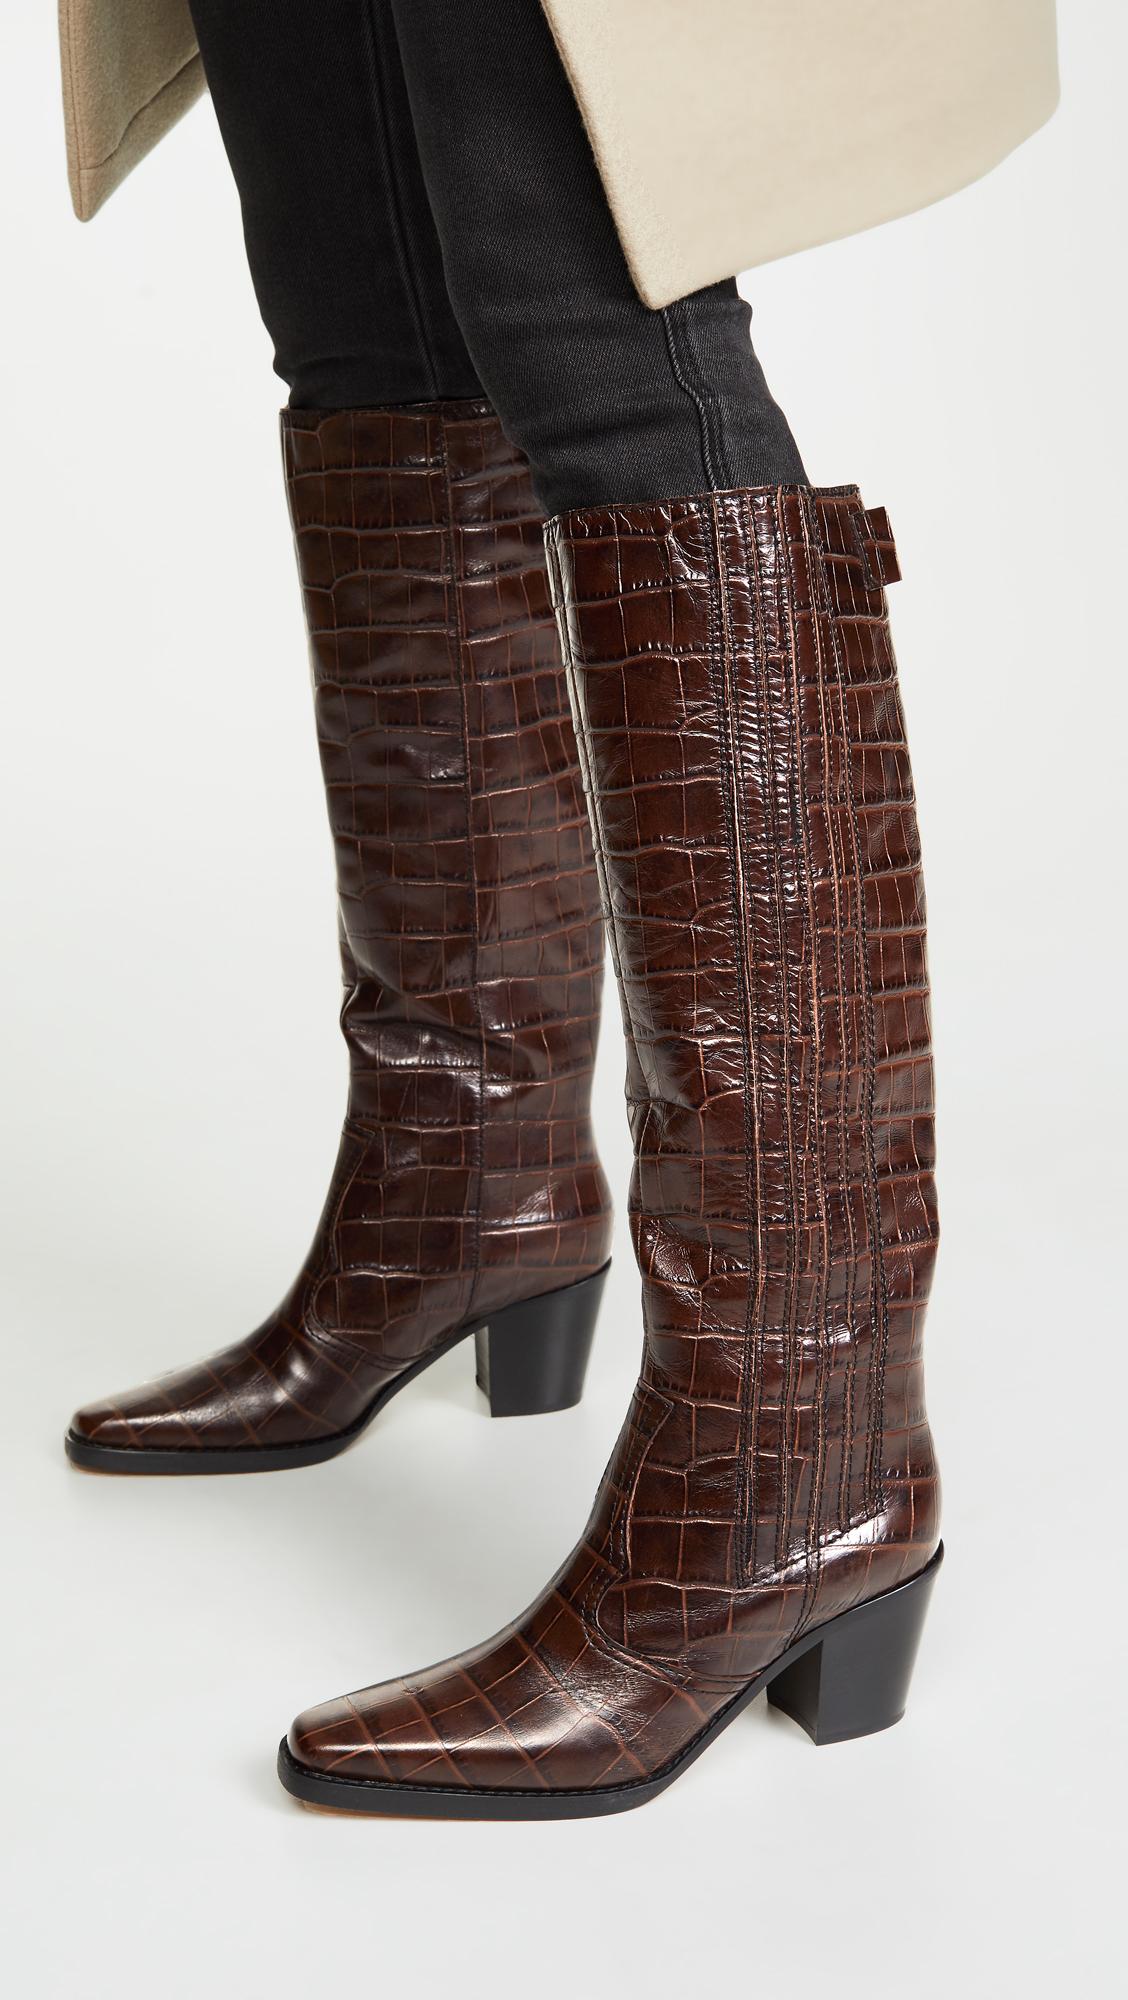 Ganni Leather Western Knee High Boots in Brown - Lyst